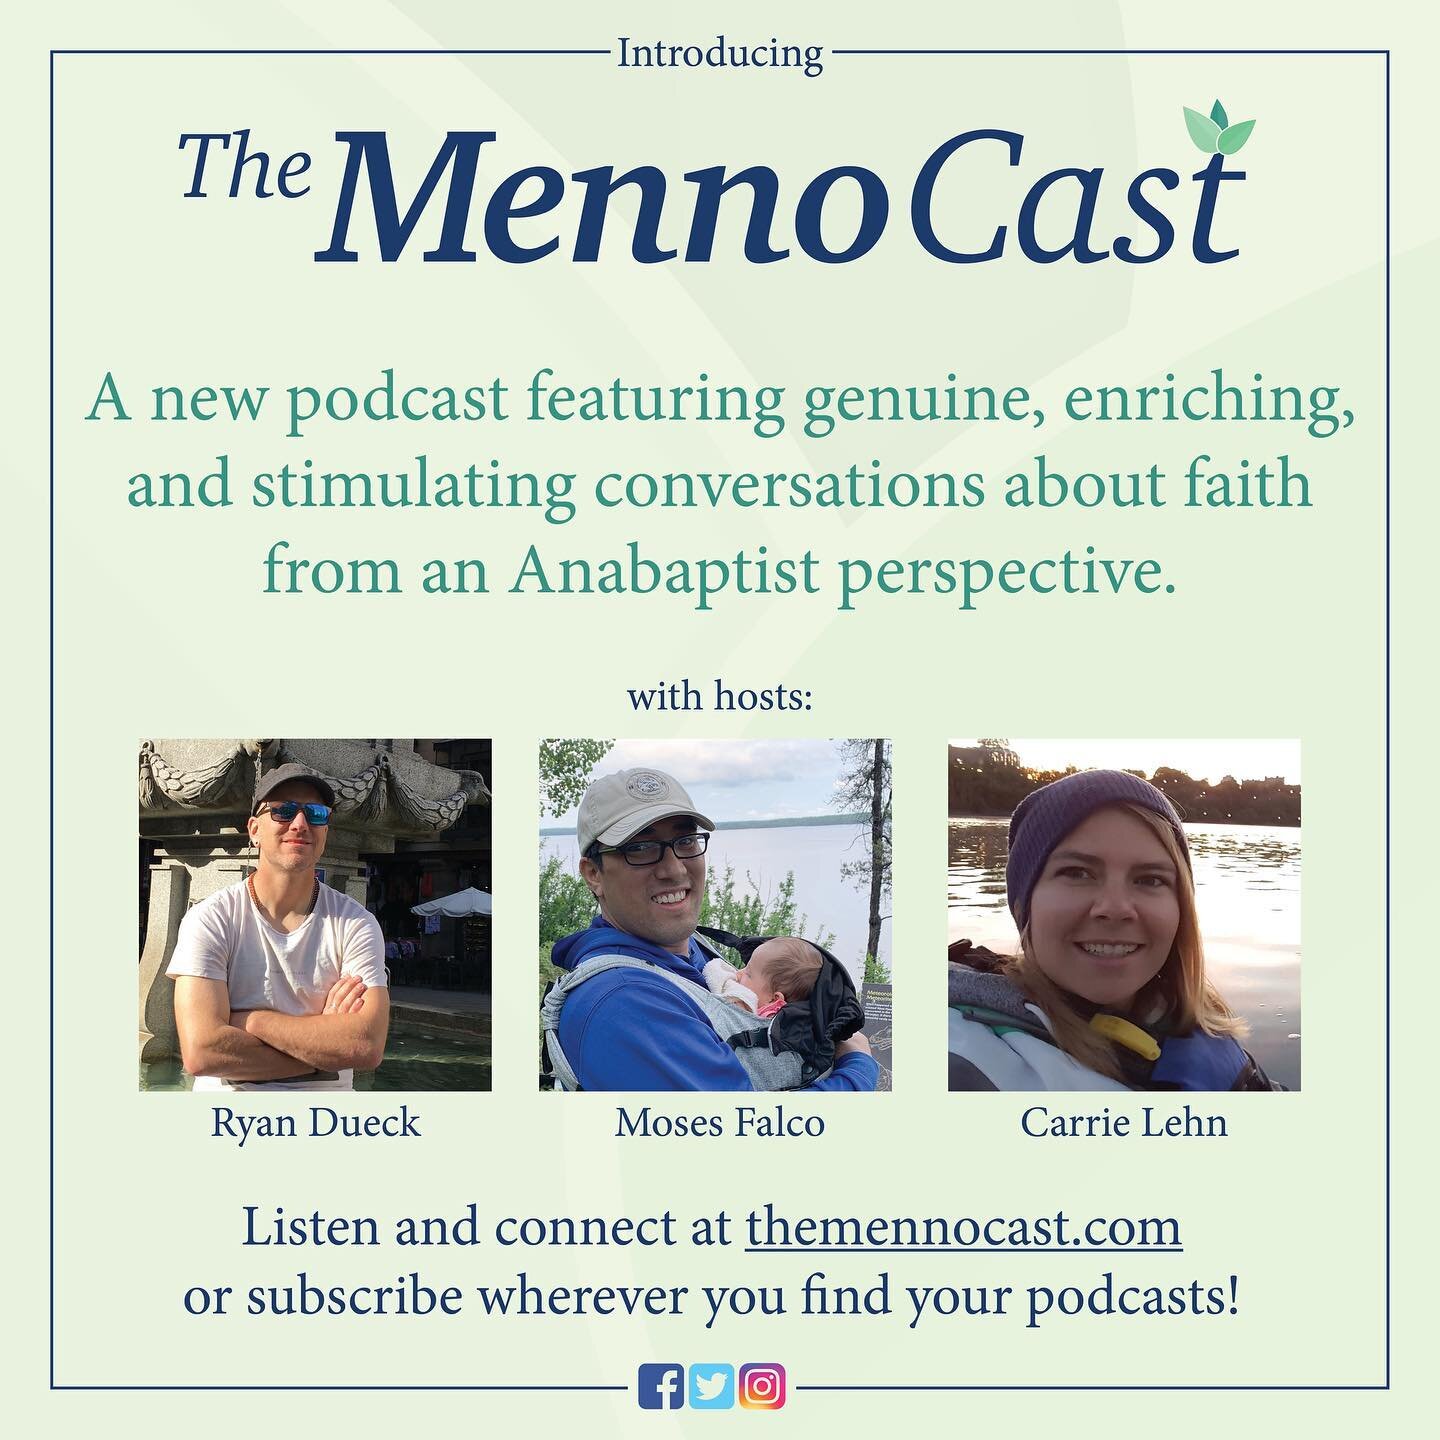 The MennoCast launches today. We have some amazing interviews lined up for our pilot season with special resource give-always each episode! Catch the first episode with special guest Meghan Larissa Good. Listen and connect at themennocast.com or subs